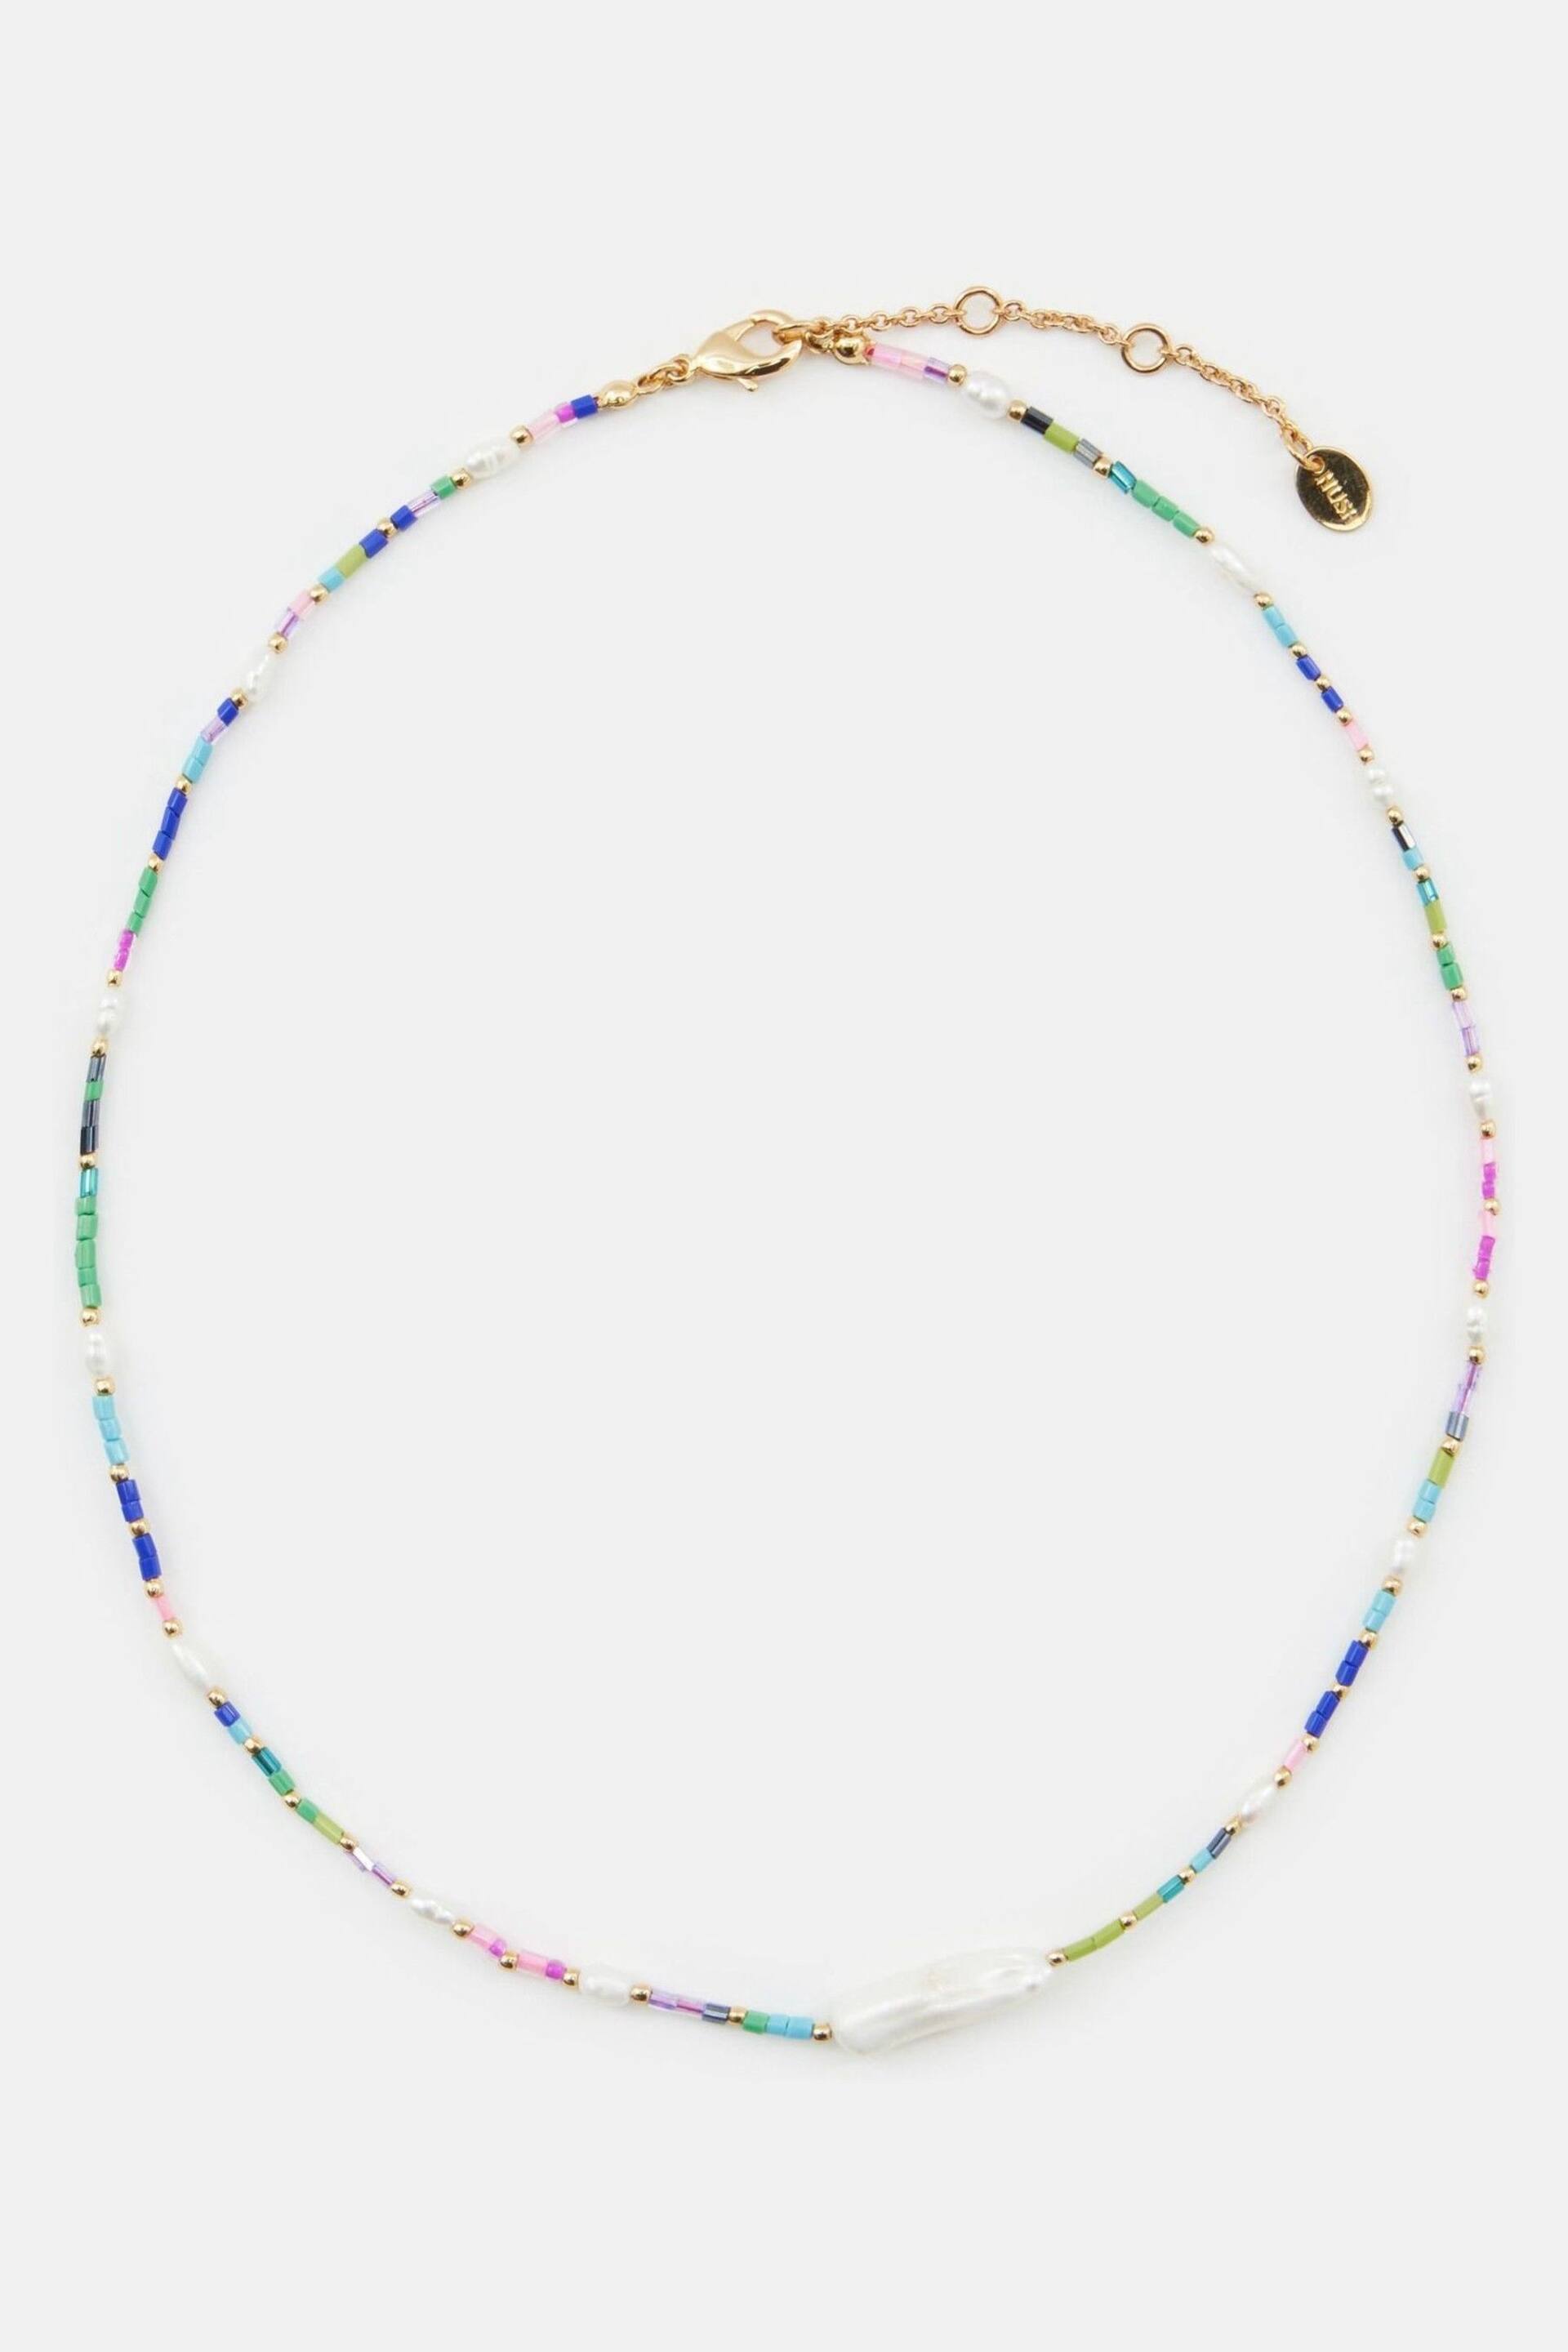 Hush Gold Tone Maura Glass Bead Necklace - Image 1 of 3